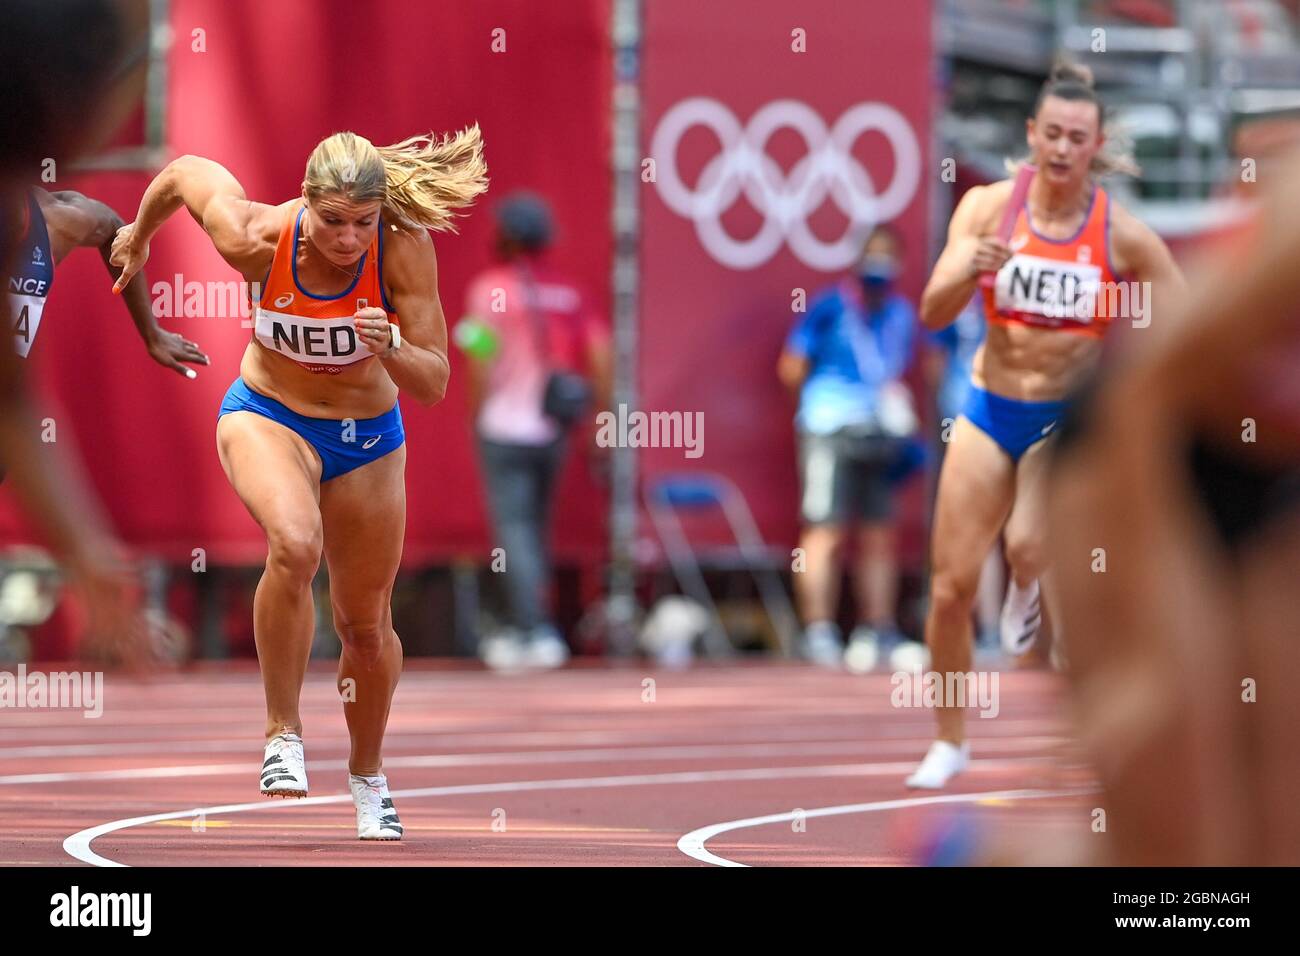 TOKYO, JAPAN - AUGUST 5: Dafne Schippers of the Netherlands competing on Women's 4x100m Relay during the Tokyo 2020 Olympic Games at the Olympic Stadium on August 5, 2021 in Tokyo, Japan (Photo by Andy Astfalck/Orange Pictures) NOCNSF ATLETIEKUNIE Stock Photo